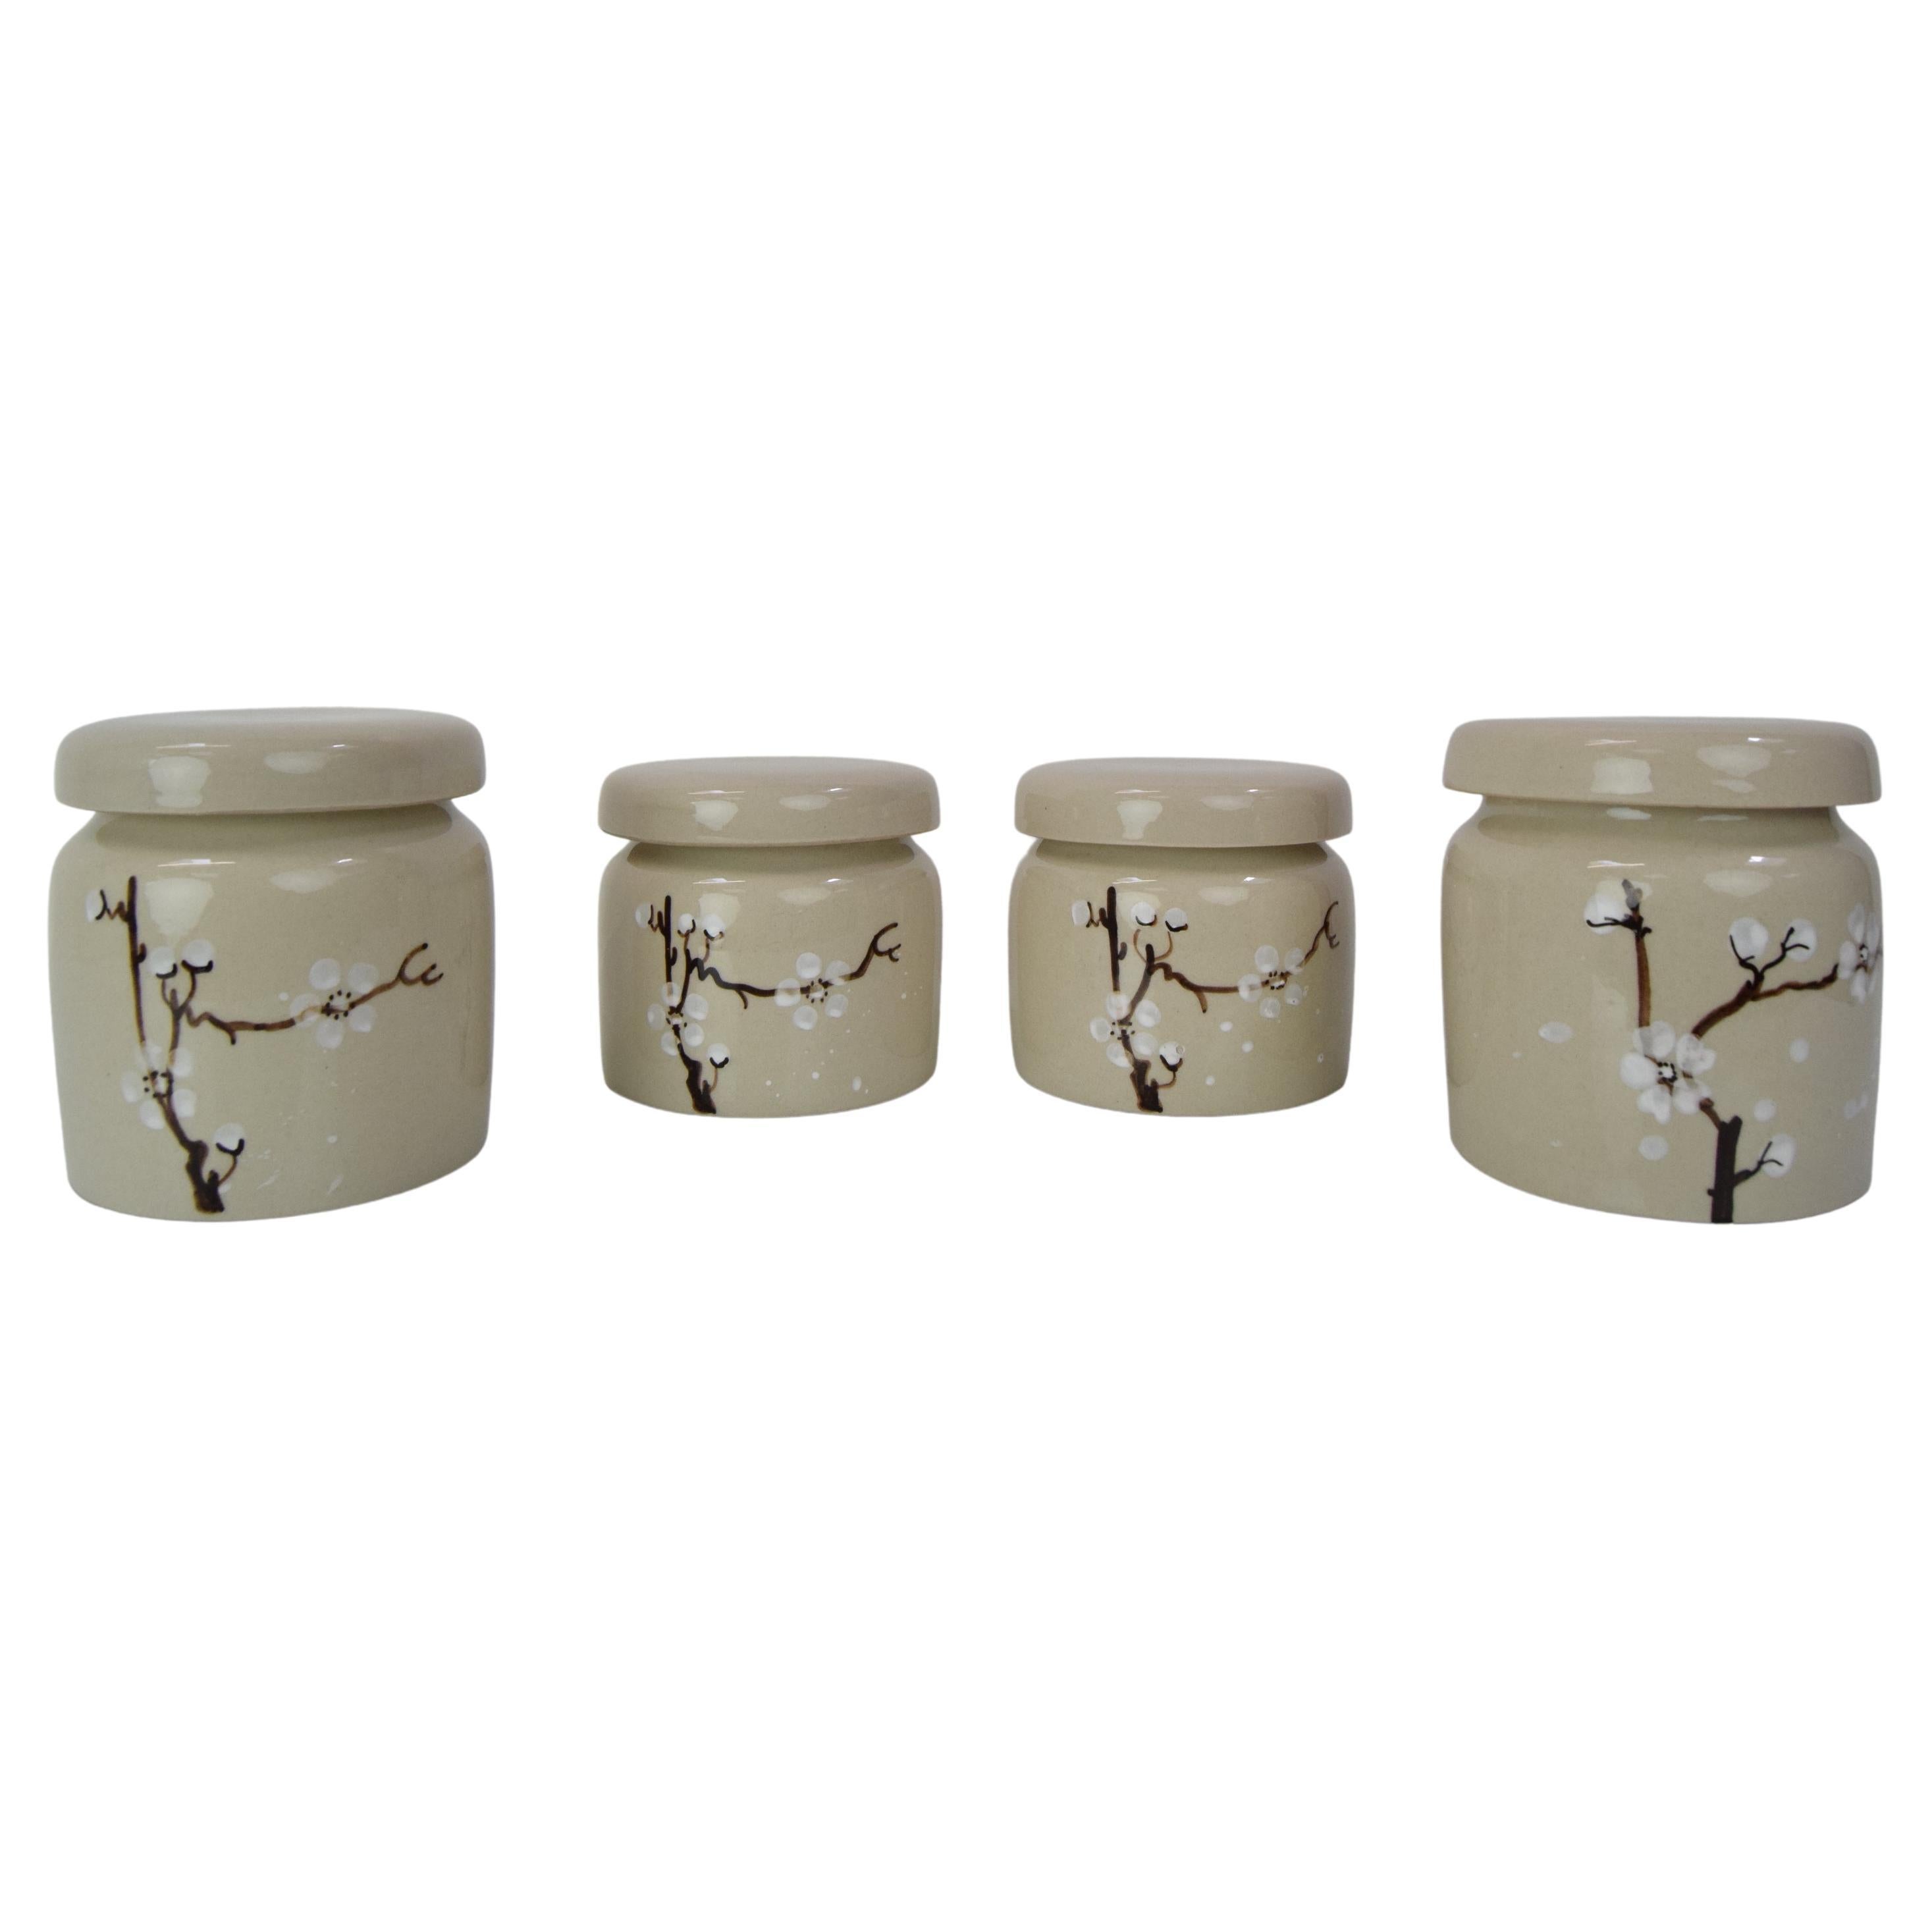 Set of Four Ceramic Cans by Ditmar Urbach, circa 1930's For Sale